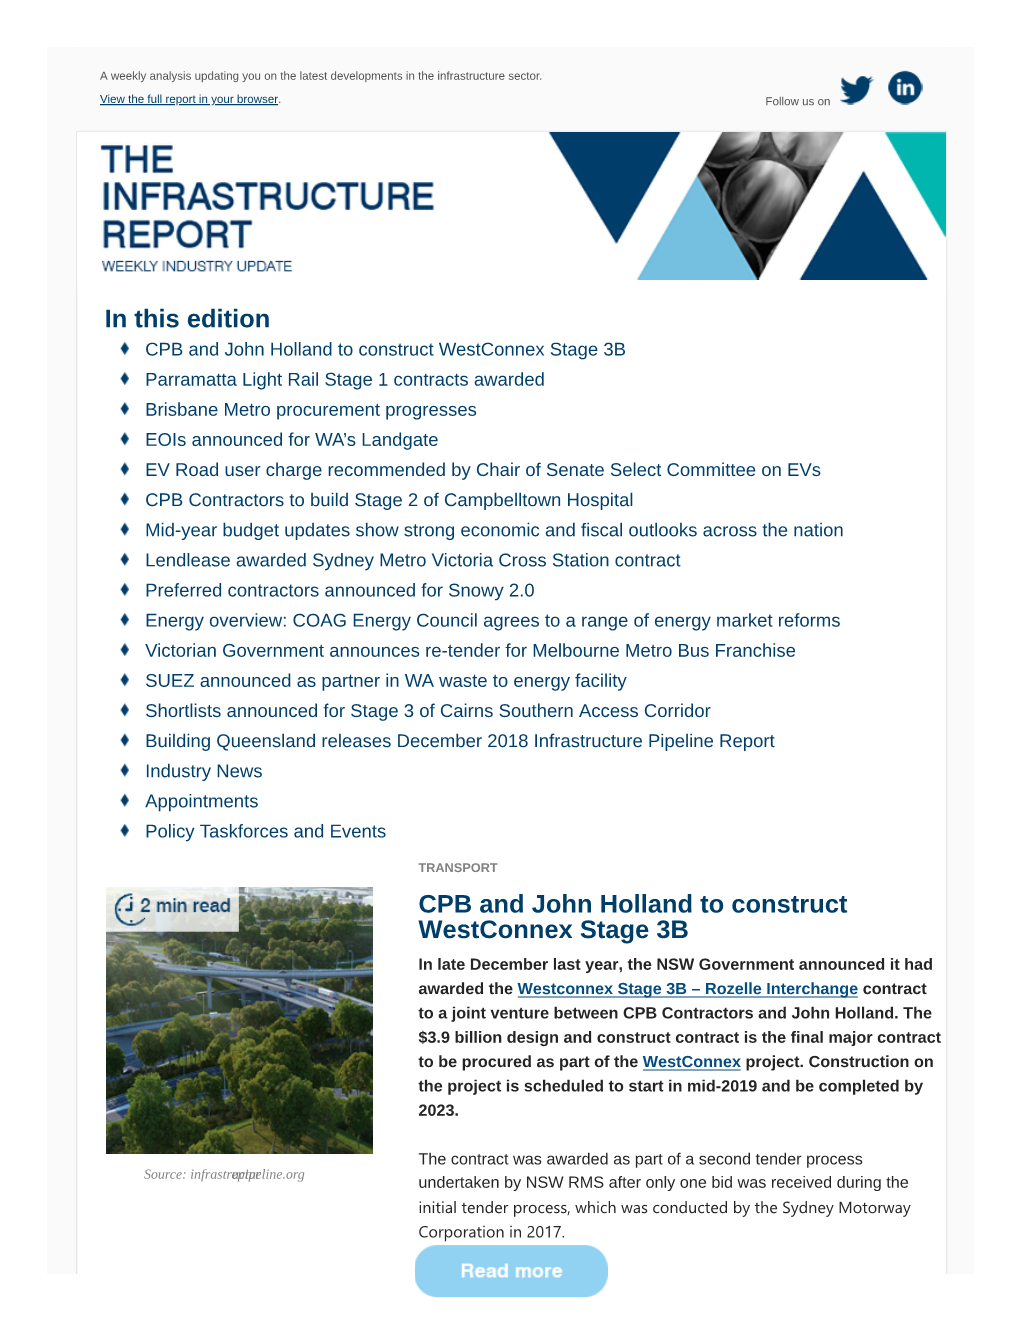 In This Edition CPB and John Holland to Construct Westconnex Stage 3B